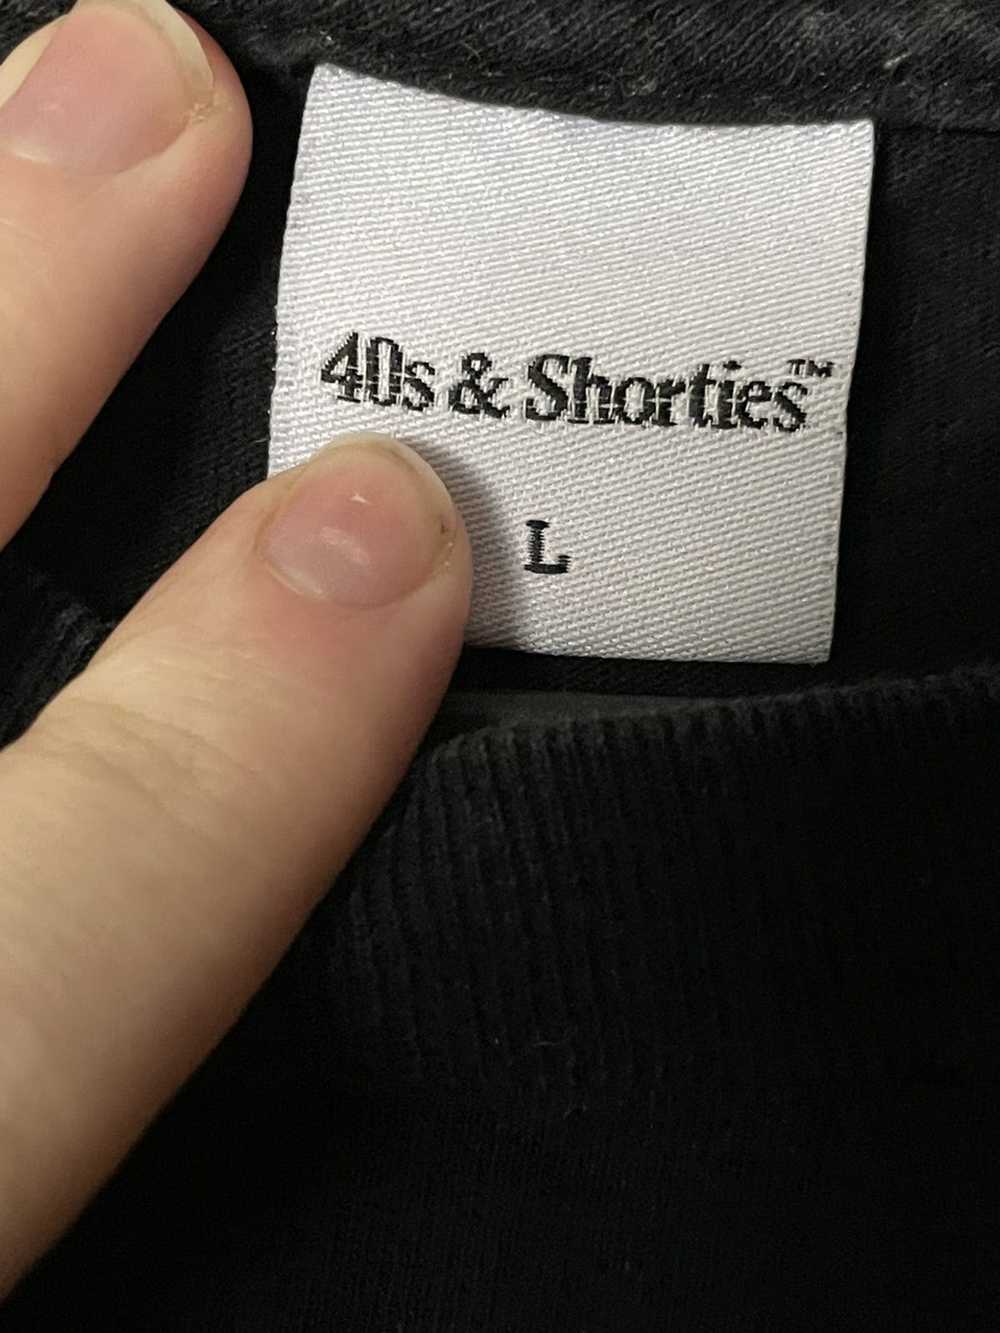 40's & Shorties Two Cup Tee - image 3